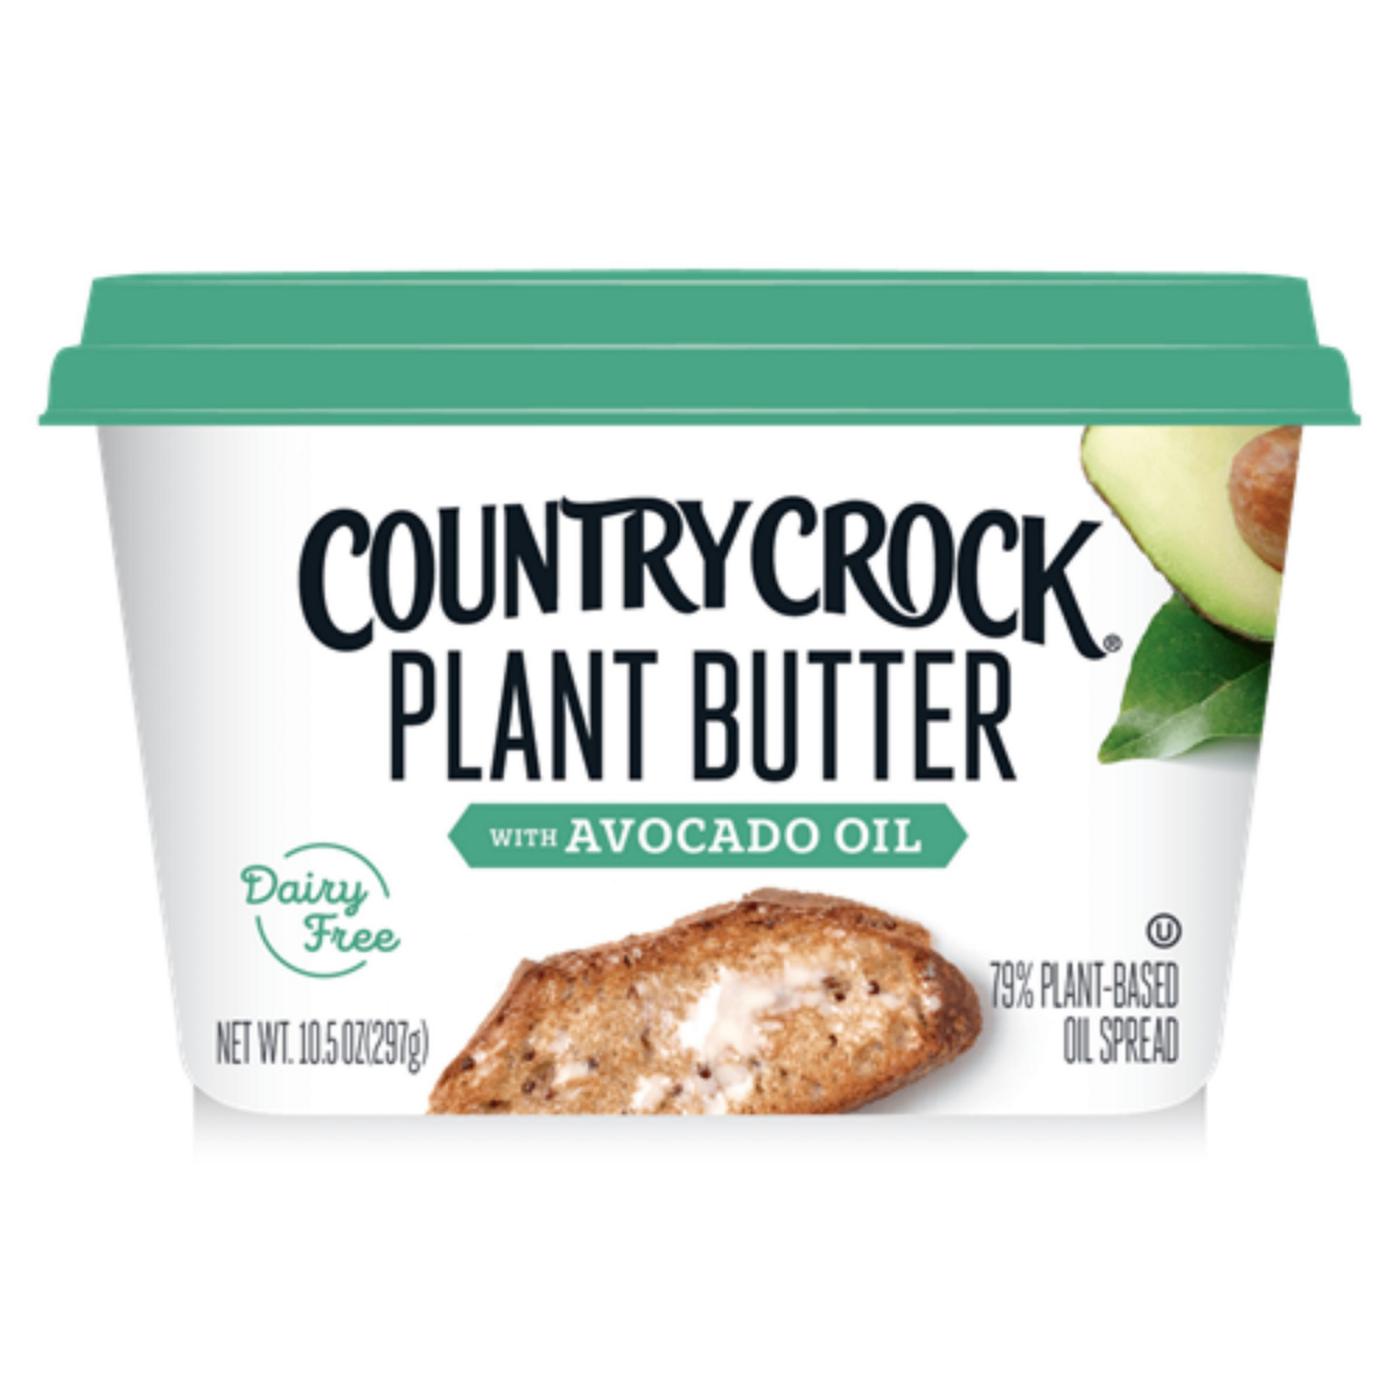 Country Crock Plant Butter with Avocado Oil Spread; image 1 of 7